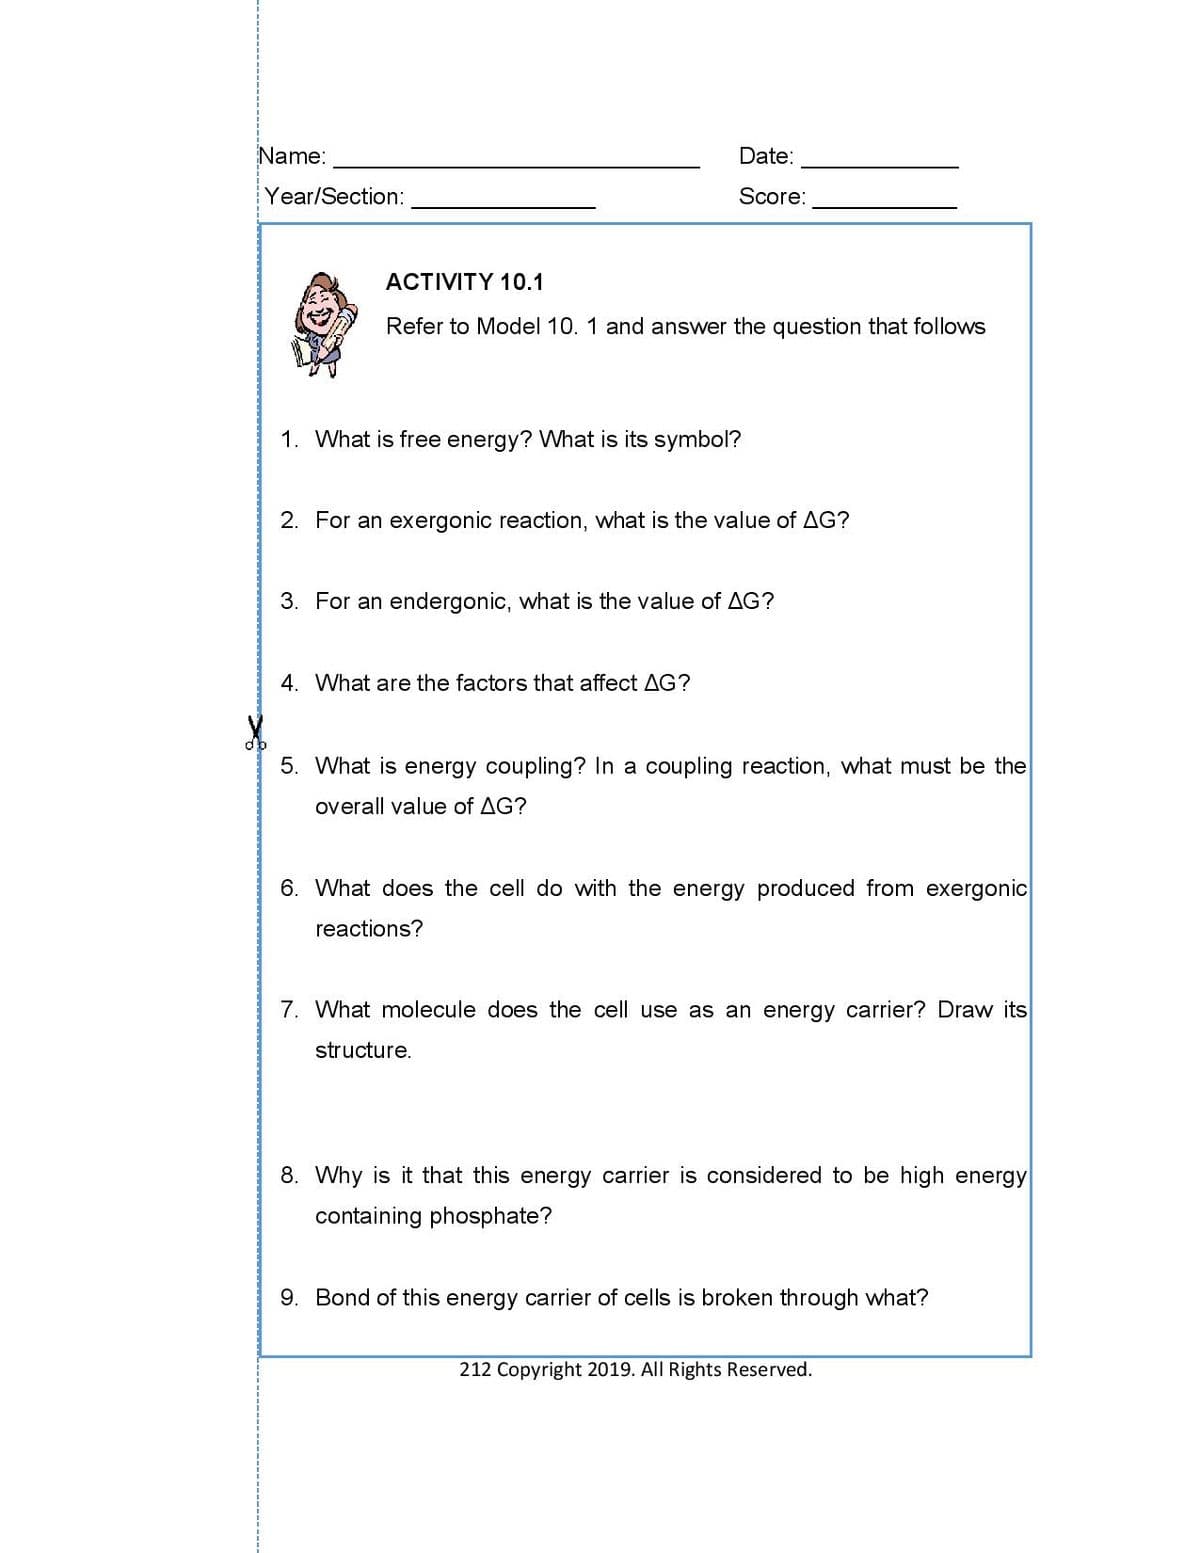 Name:
Date:
Year/Section:
Score:
ACTIVITY 10.1
Refer to Model 10. 1 and answer the question that follows
1. What is free energy? What is its symbol?
2. For an exergonic reaction, what is the value of AG?
3. For an endergonic, what is the value of AG?
4. What are the factors that affect AG?
5. What is energy coupling? In a coupling reaction, what must be the
overall value of AG?
6. What does the cell do with the energy produced from exergonic
reactions?
7. What molecule does the cell use as an energy carrier? Draw its
structure.
8. Why is it that this energy carrier is considered to be high energy
containing phosphate?
9. Bond of this energy carrier of cells is broken through what?
212 Copyright 2019. All Rights Reserved.
